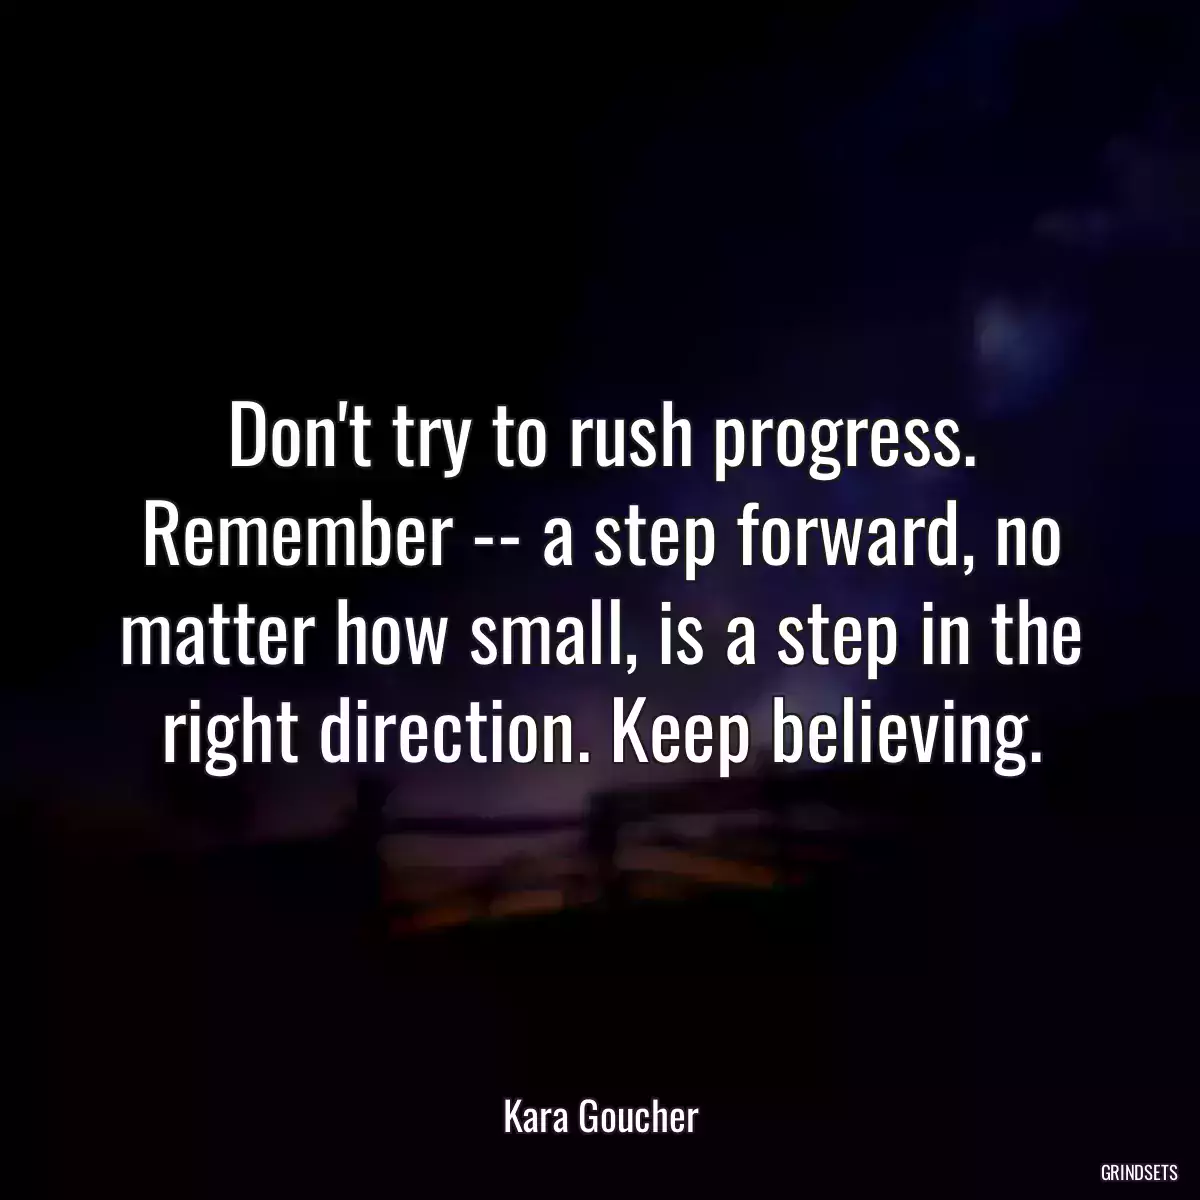 Don\'t try to rush progress. Remember -- a step forward, no matter how small, is a step in the right direction. Keep believing.